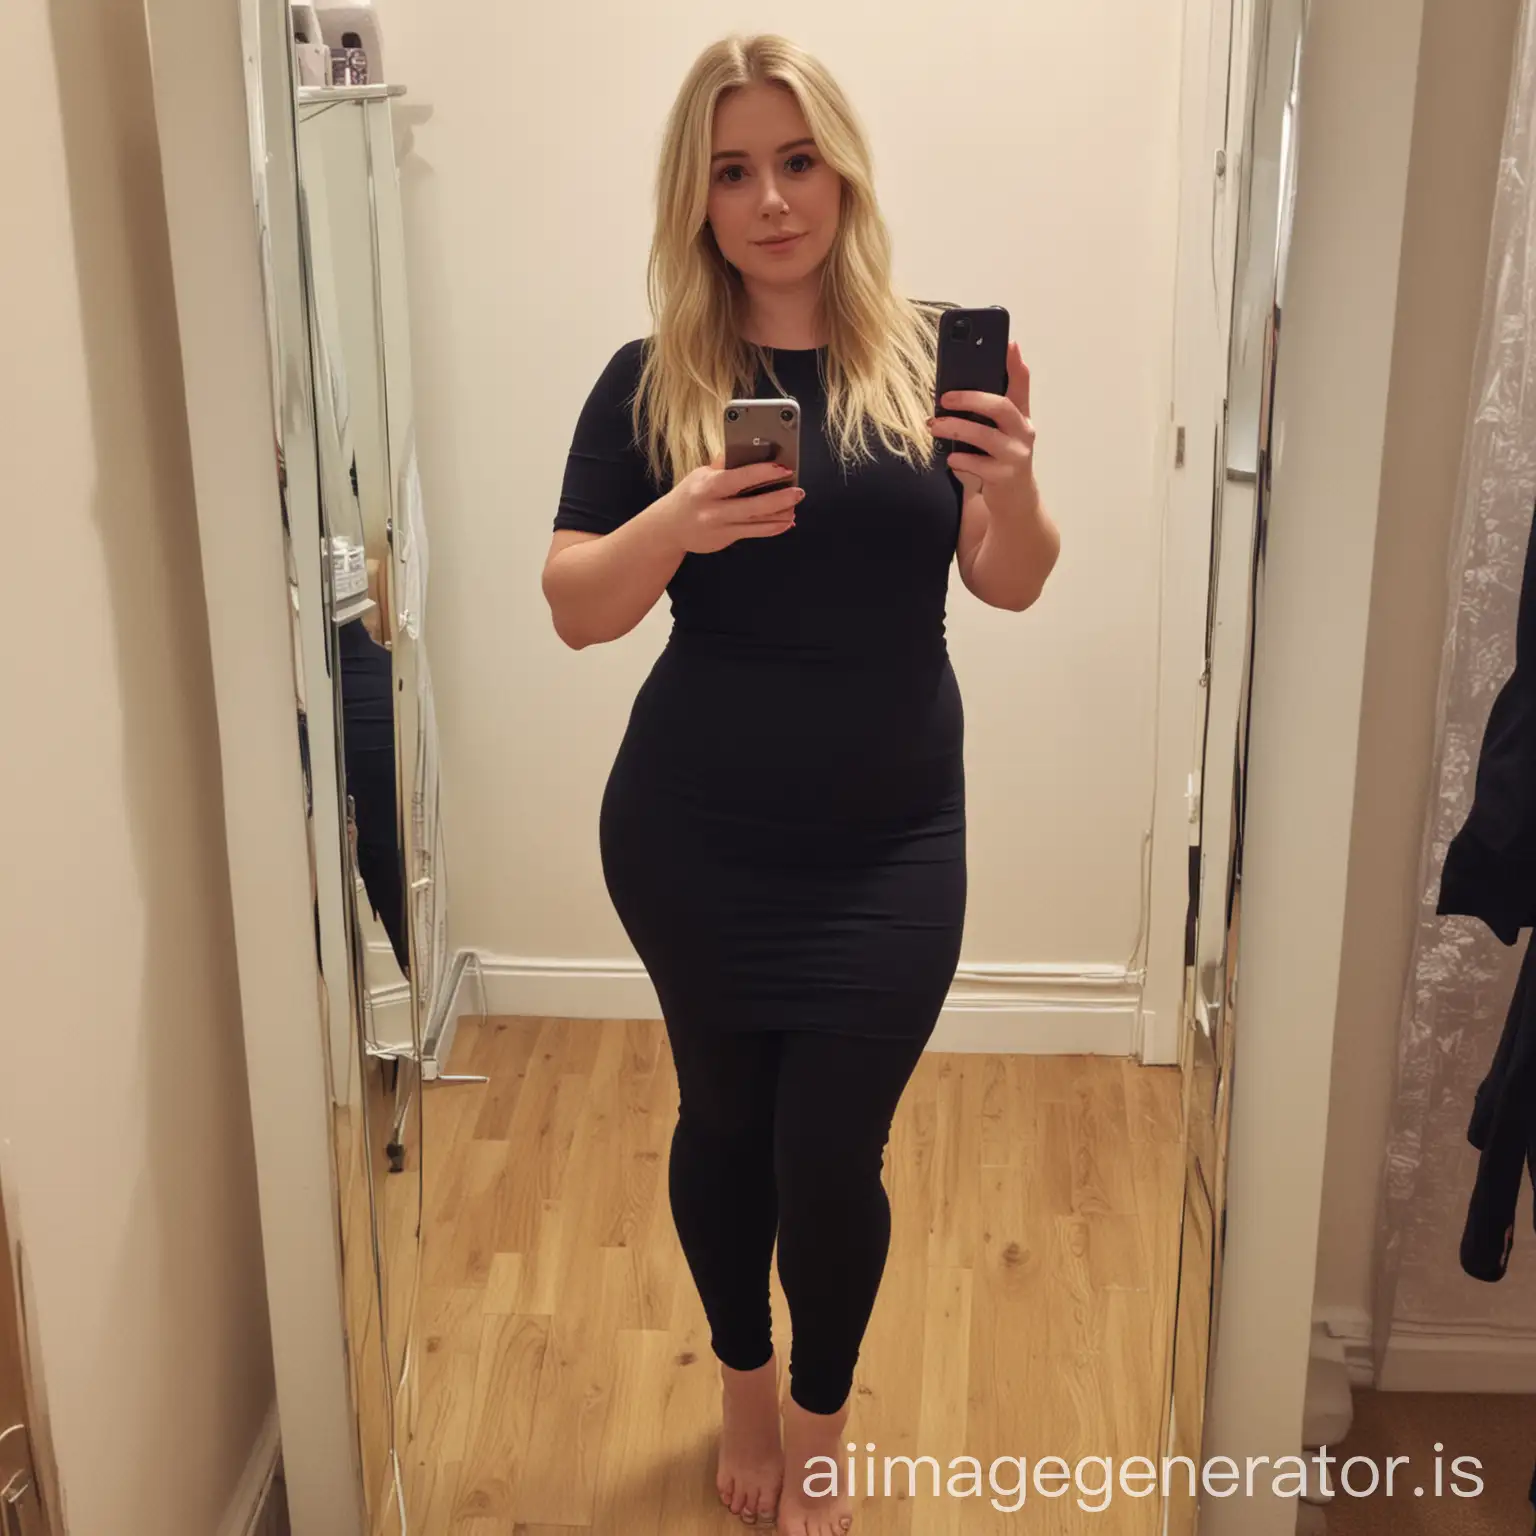 Young-Blonde-Woman-Taking-FullLength-Mirror-Selfie-in-Stylish-Attire